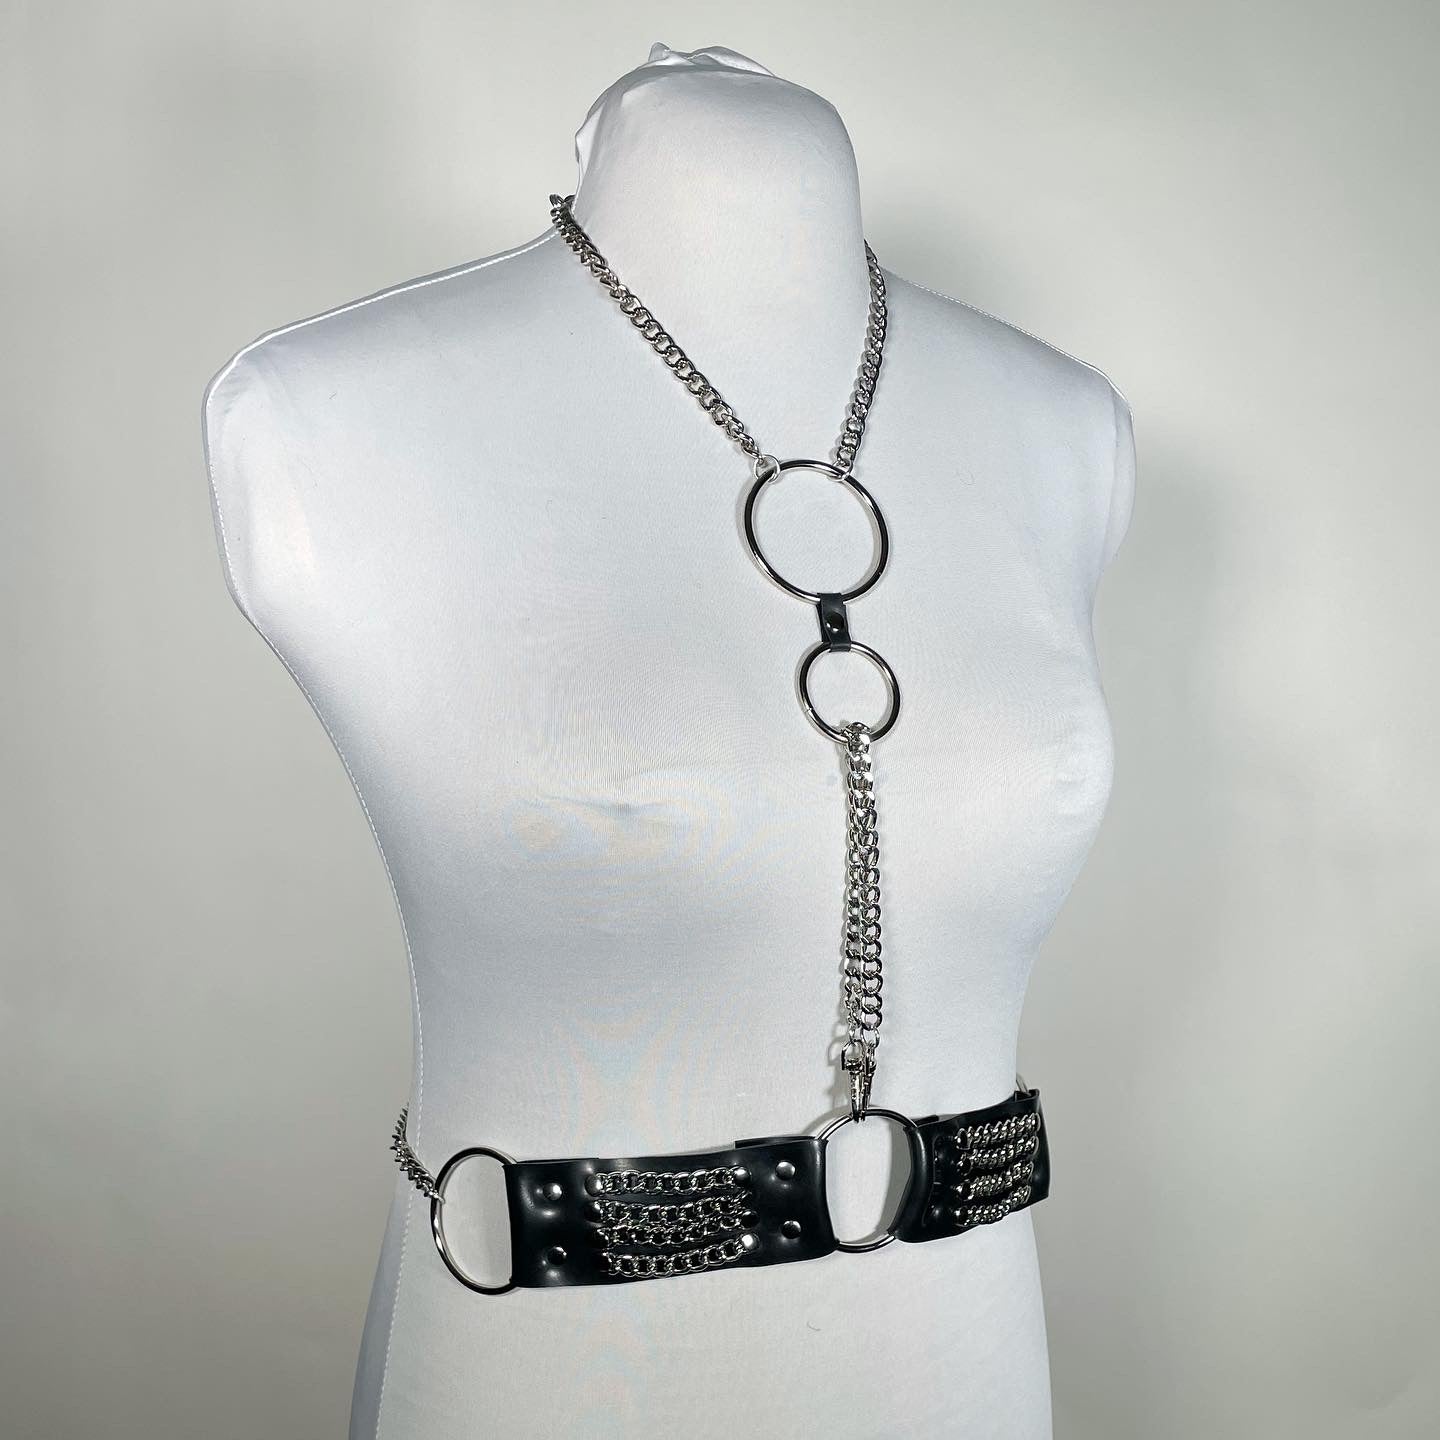 London Dungeon Convertible Harness